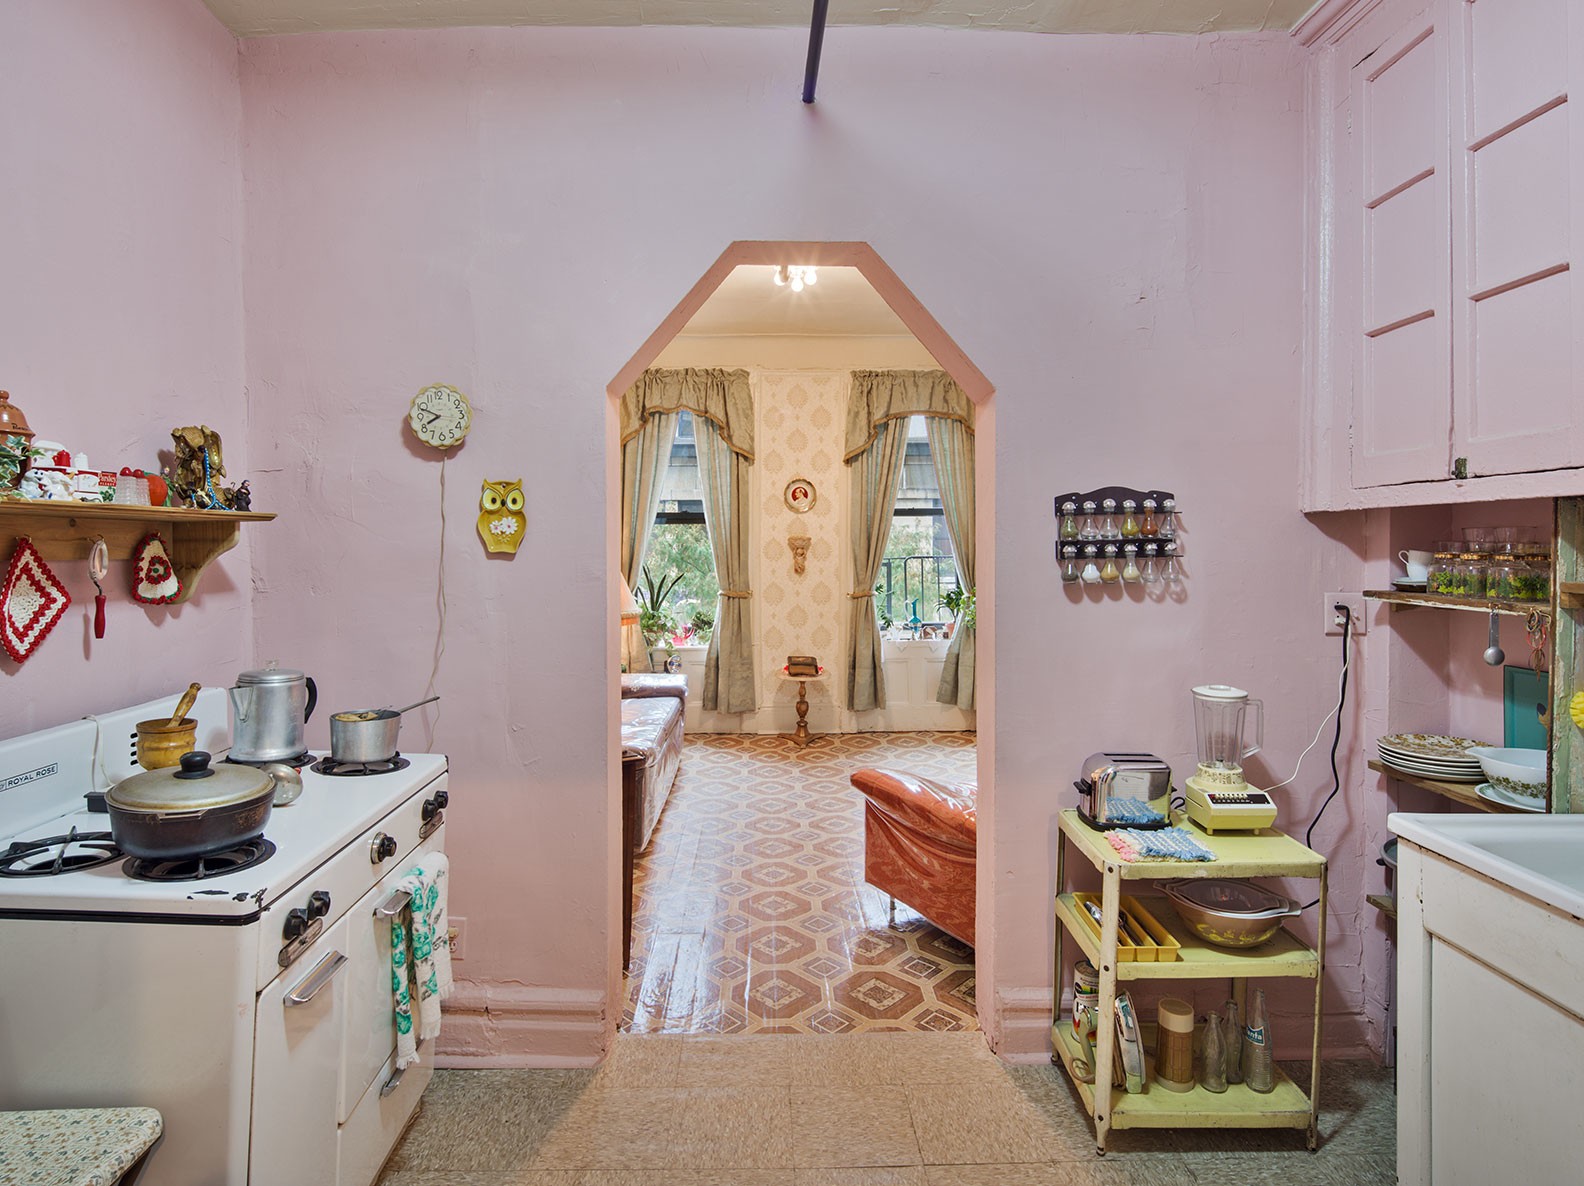 Kitchen inside a recreated apartment at 103 Orchard Street